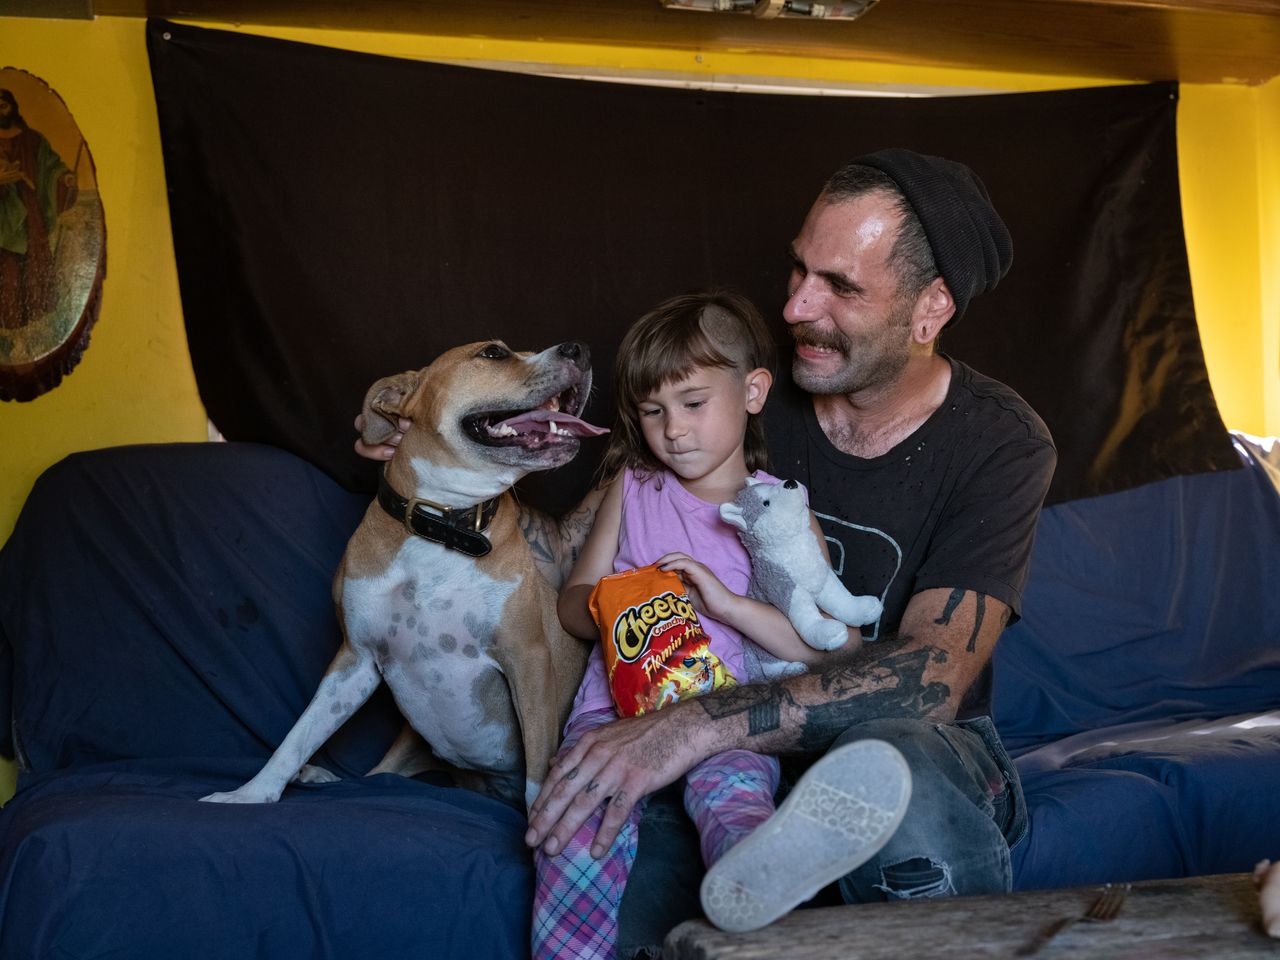 Chris Geddis sits in his RV with his daughter, Lilith, and their dog, Bourbon.